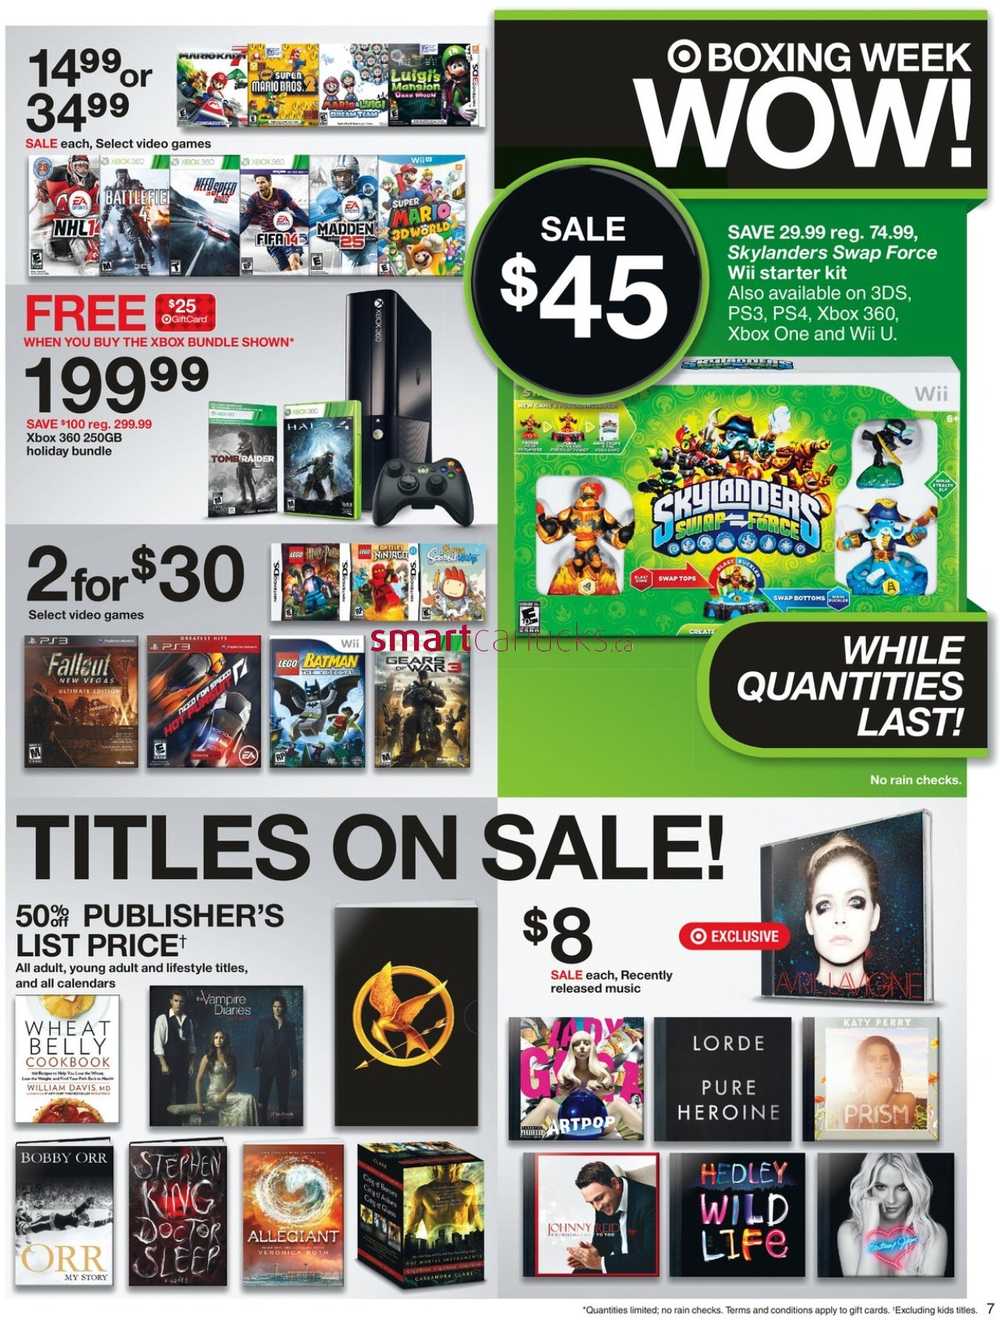 Target Canada Boxing Day  Week Flyer December 26 - January 2, 2013